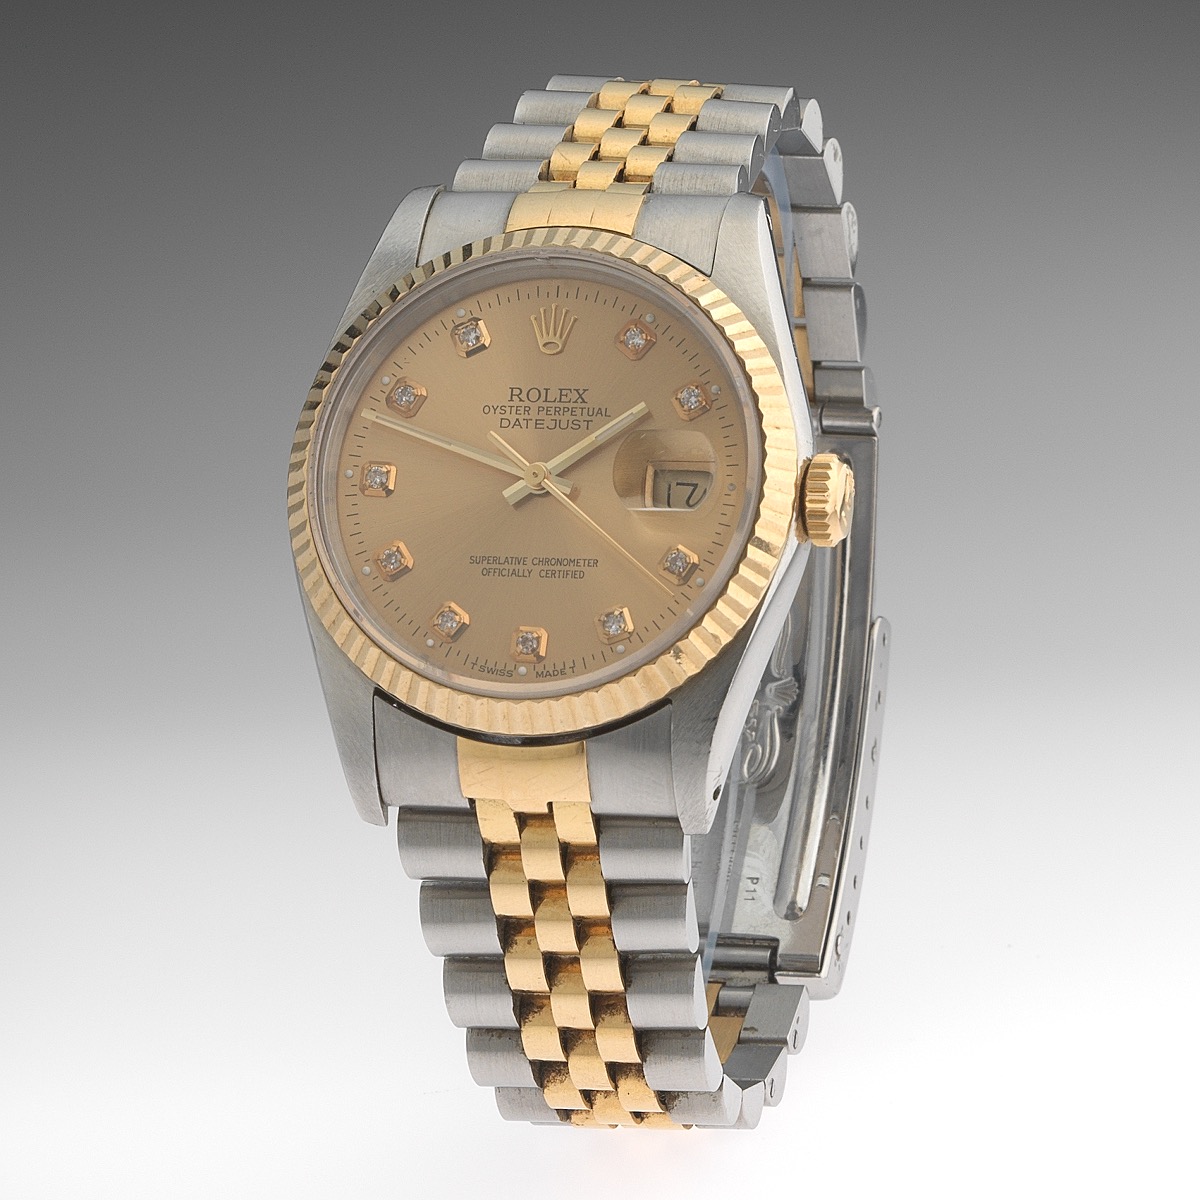 superlative chronometer officially certified rolex oyster perpetual datejust